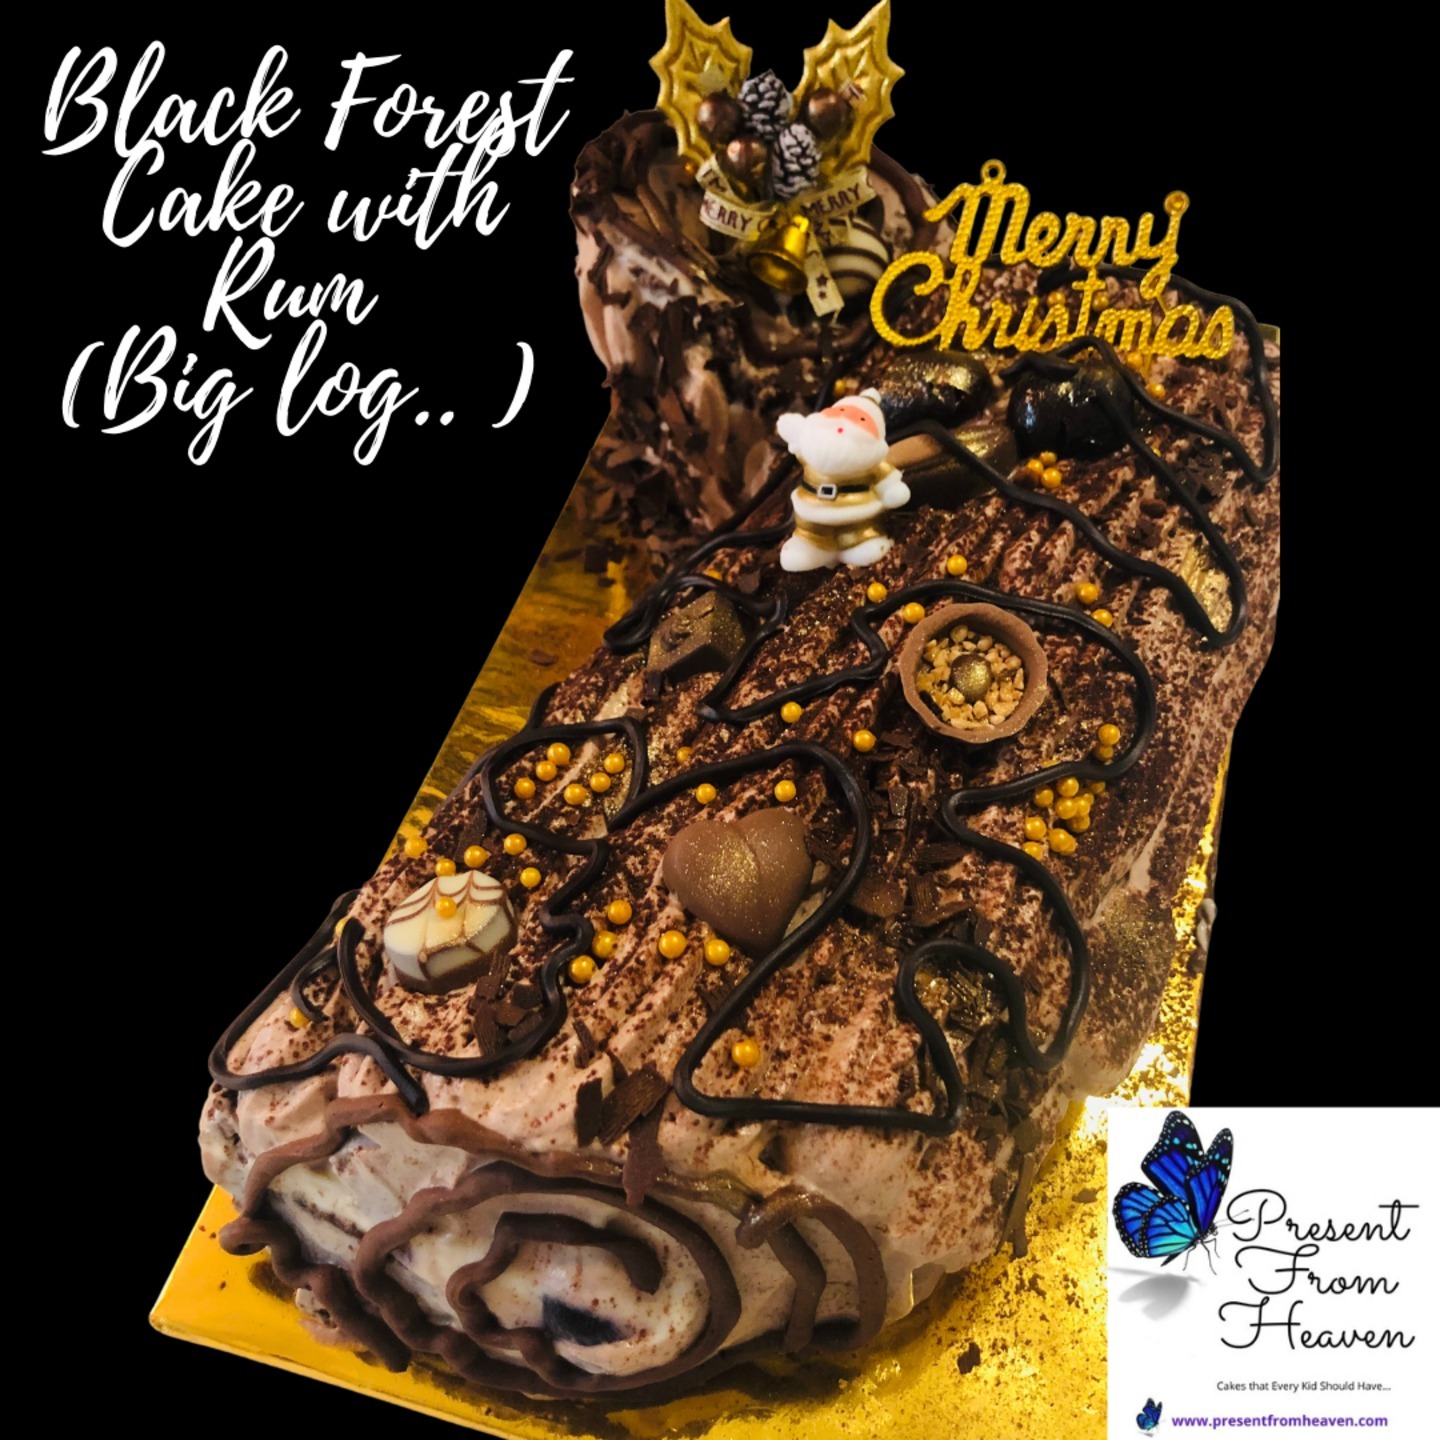 Black forest cake with Rum (Big Log & small log)